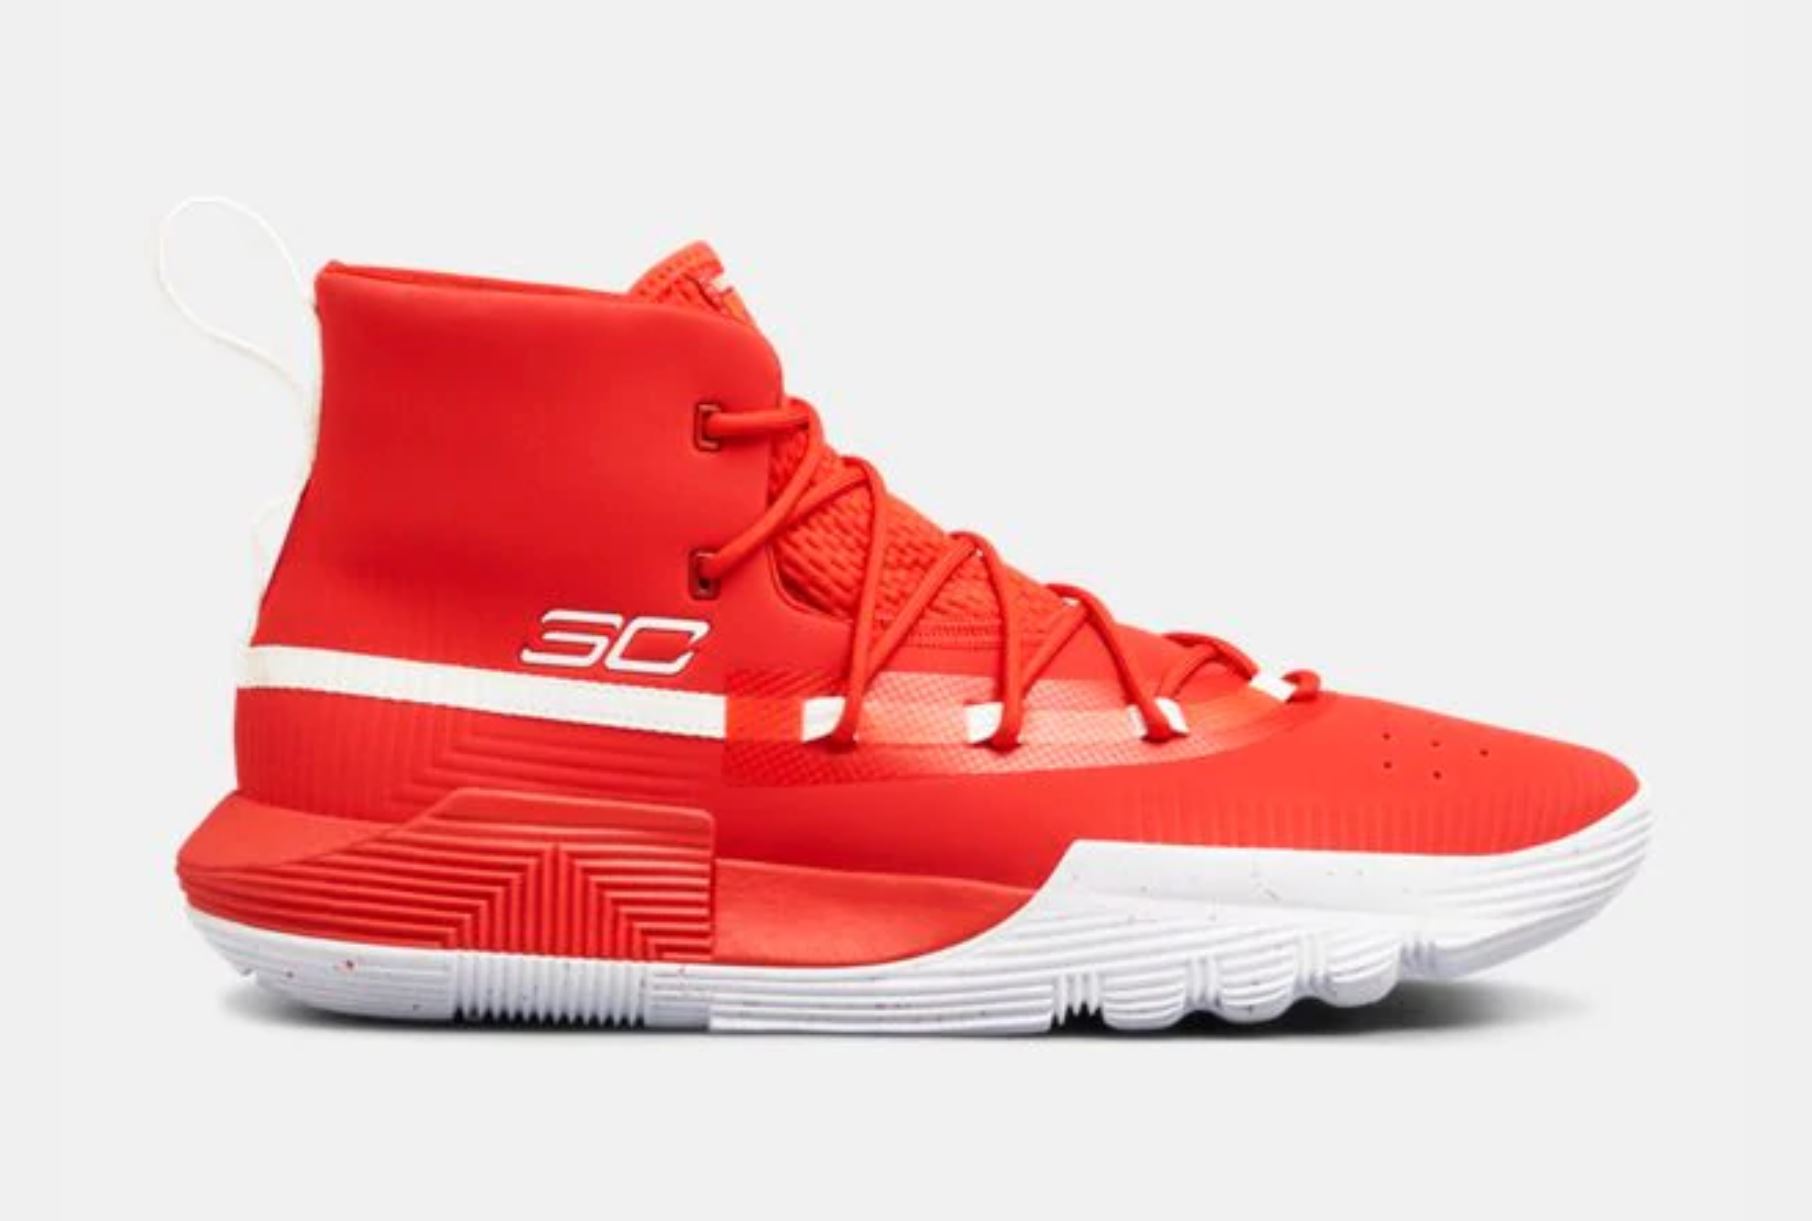 The SC 3ZER0 II is Stephen Curry's 